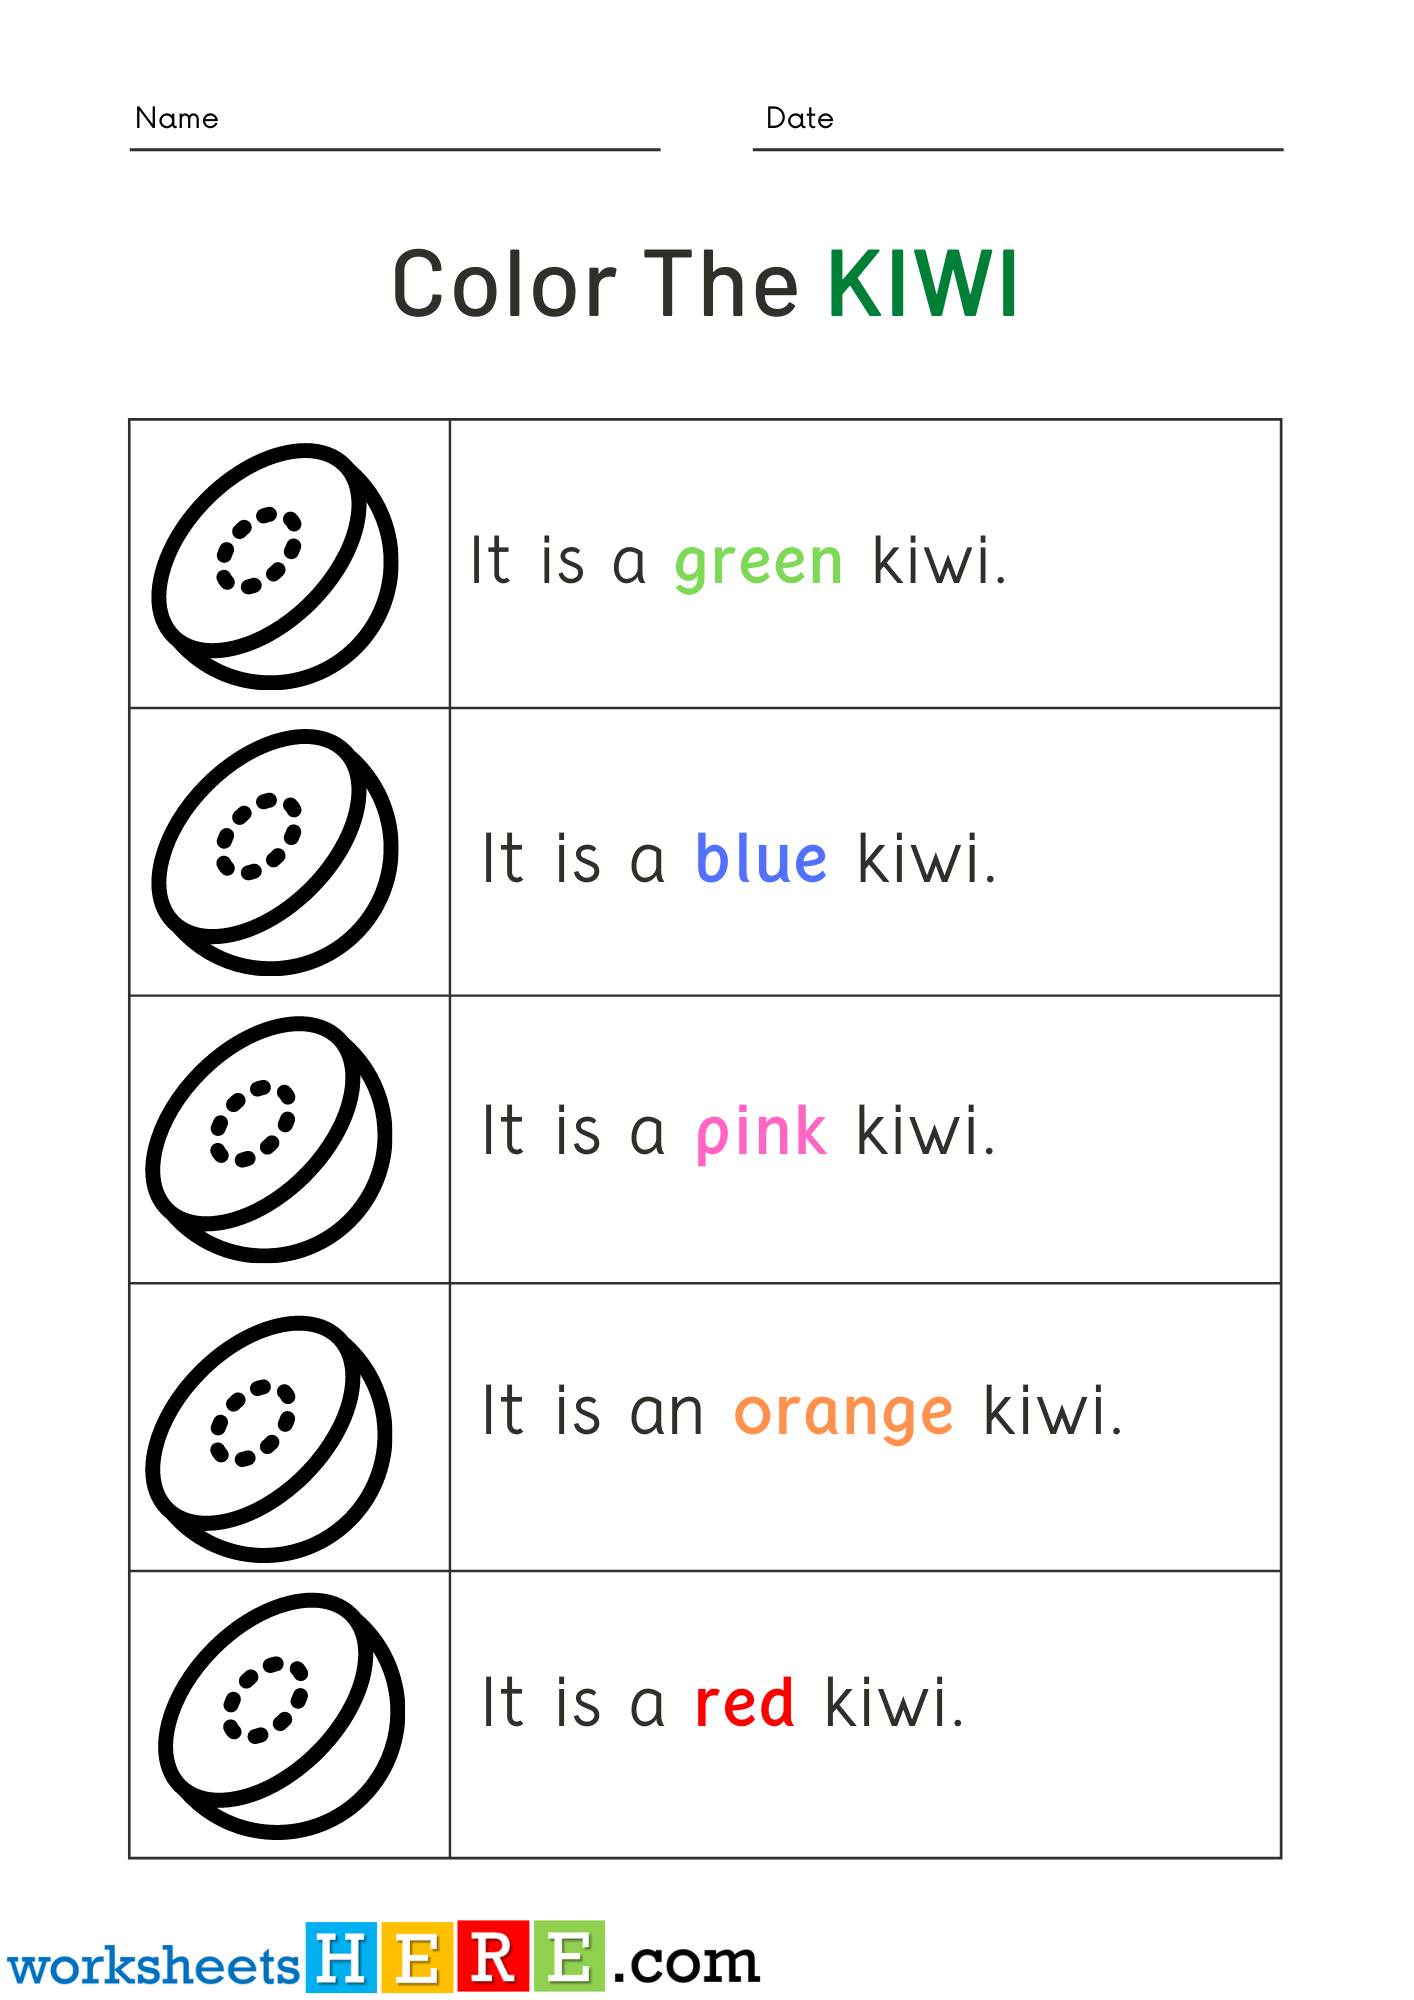 Read Words and Color Kiwi Pictures Activity PDF Worksheets For Kindergarten